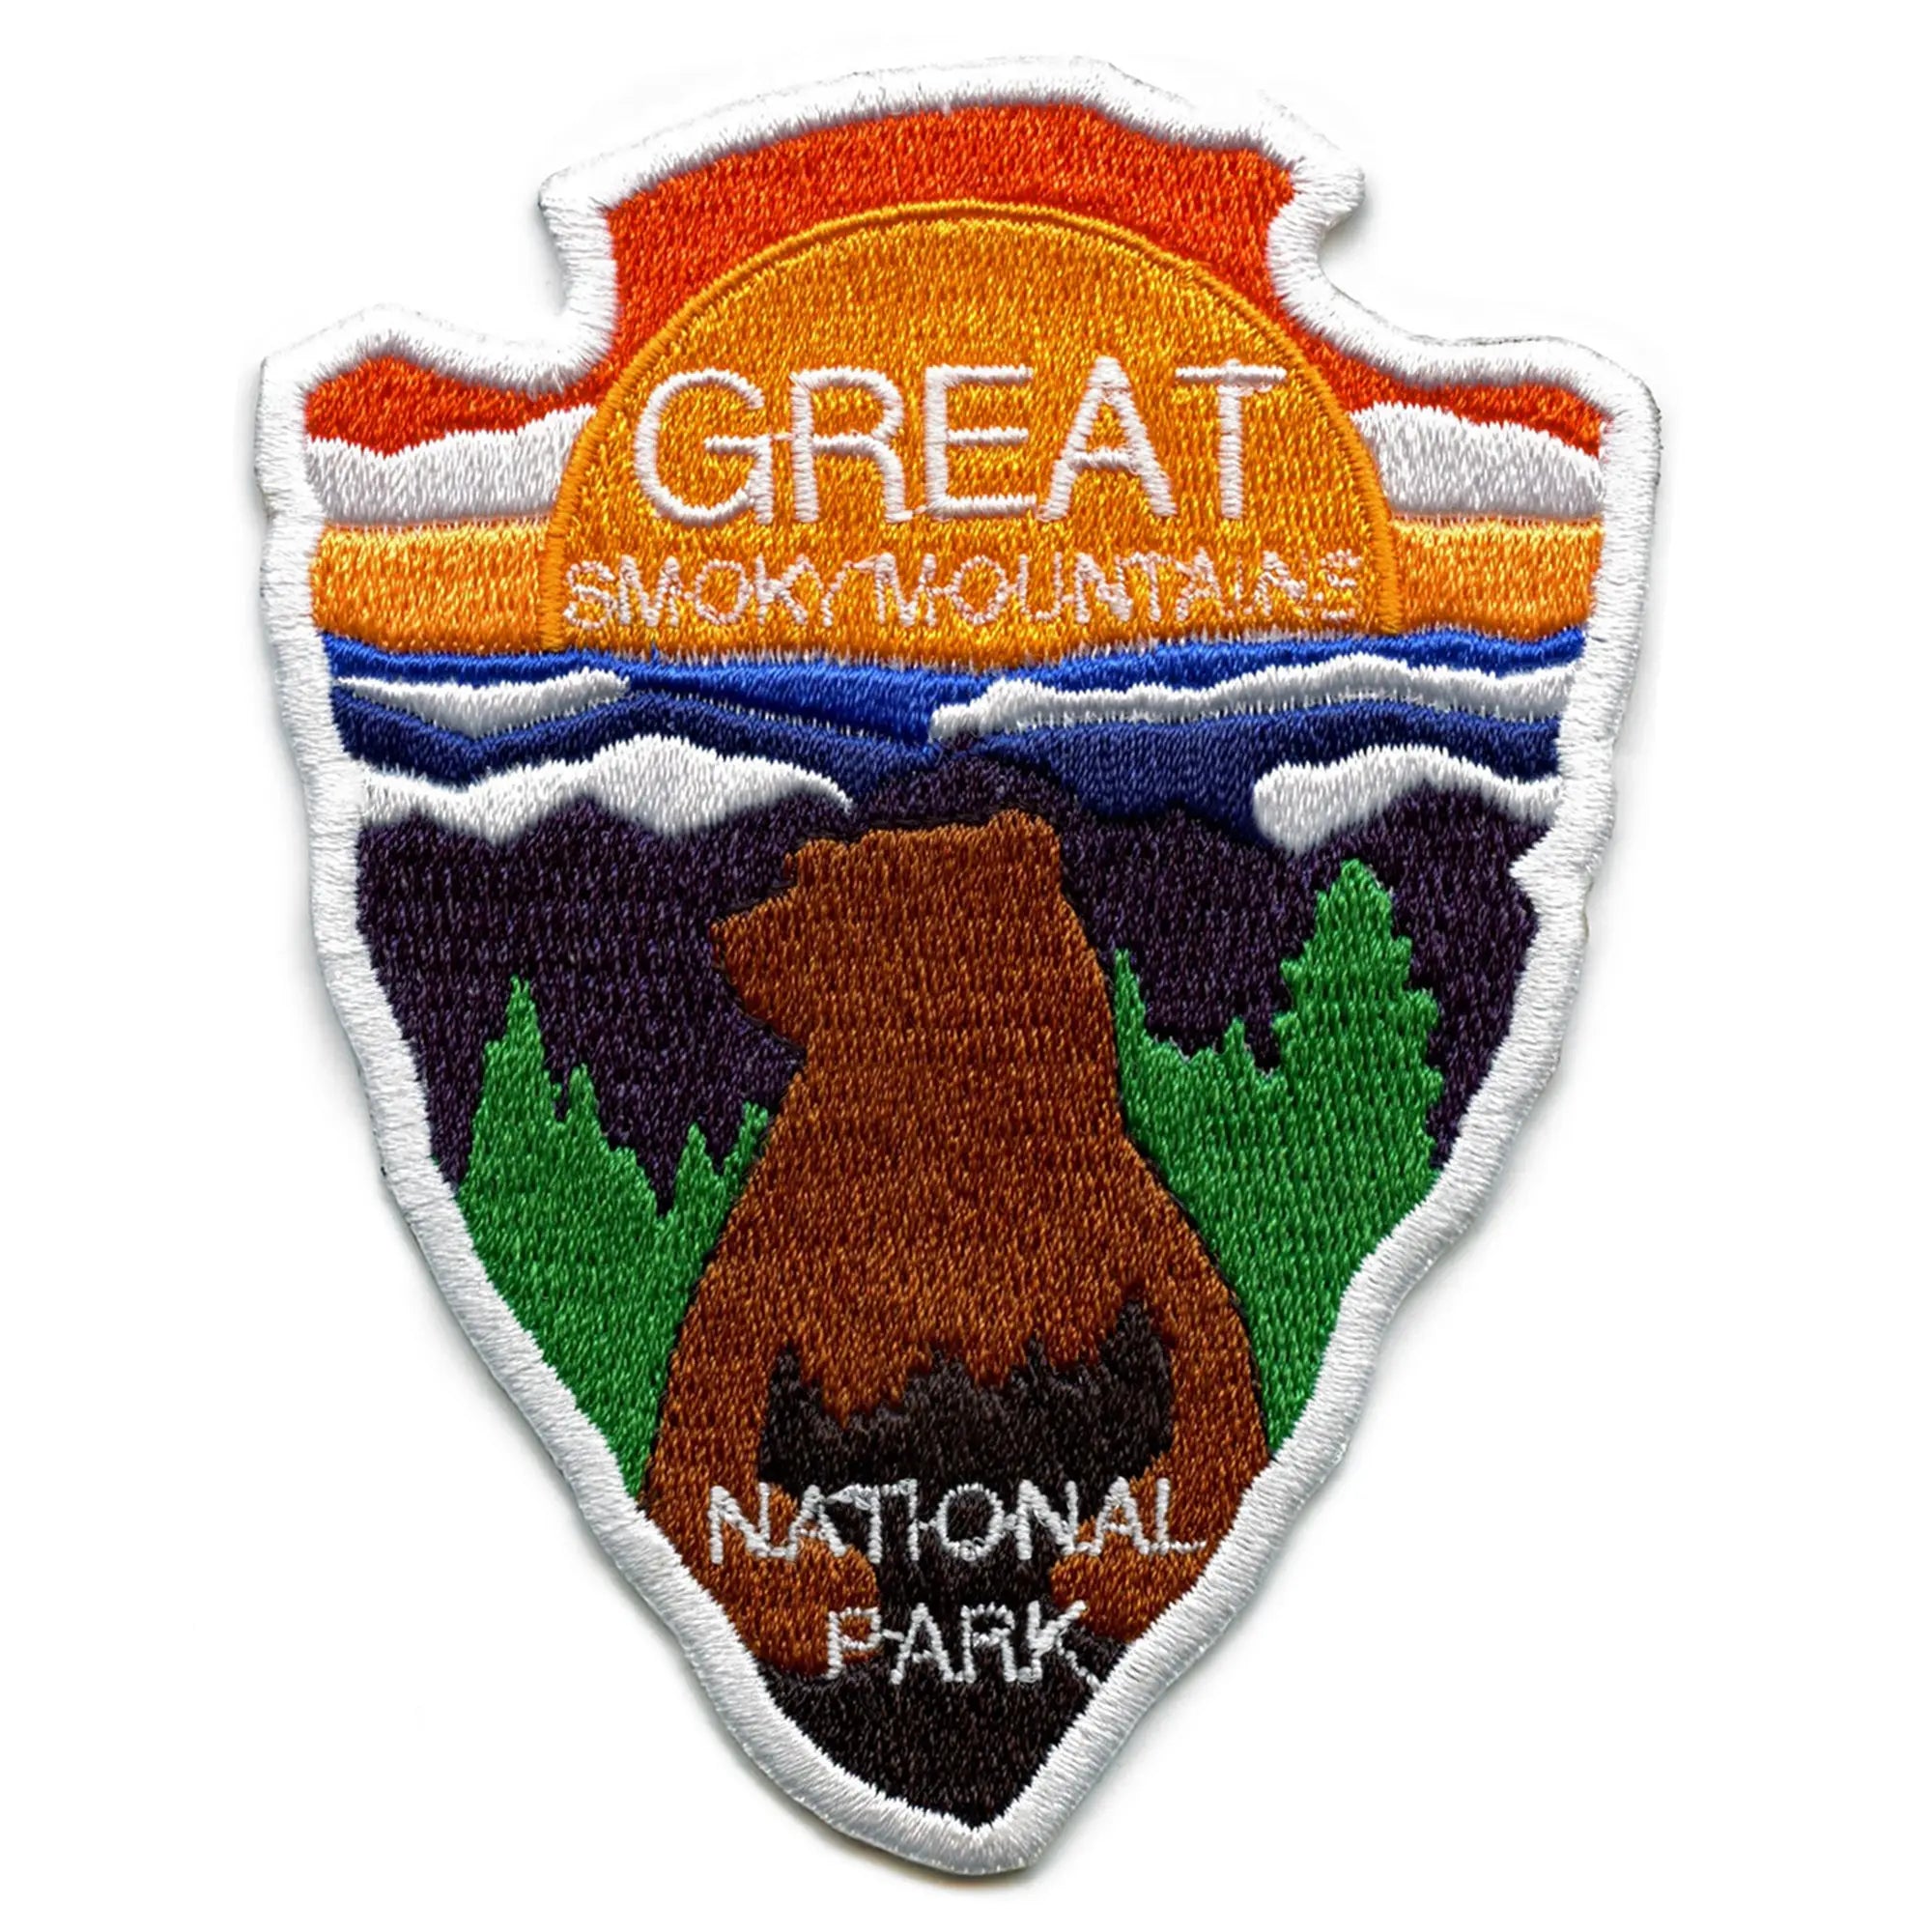 Great Smoky Mountain Yellowstone National Park Nurture Nature Embroidered  Patches Hook Backing for Clothing